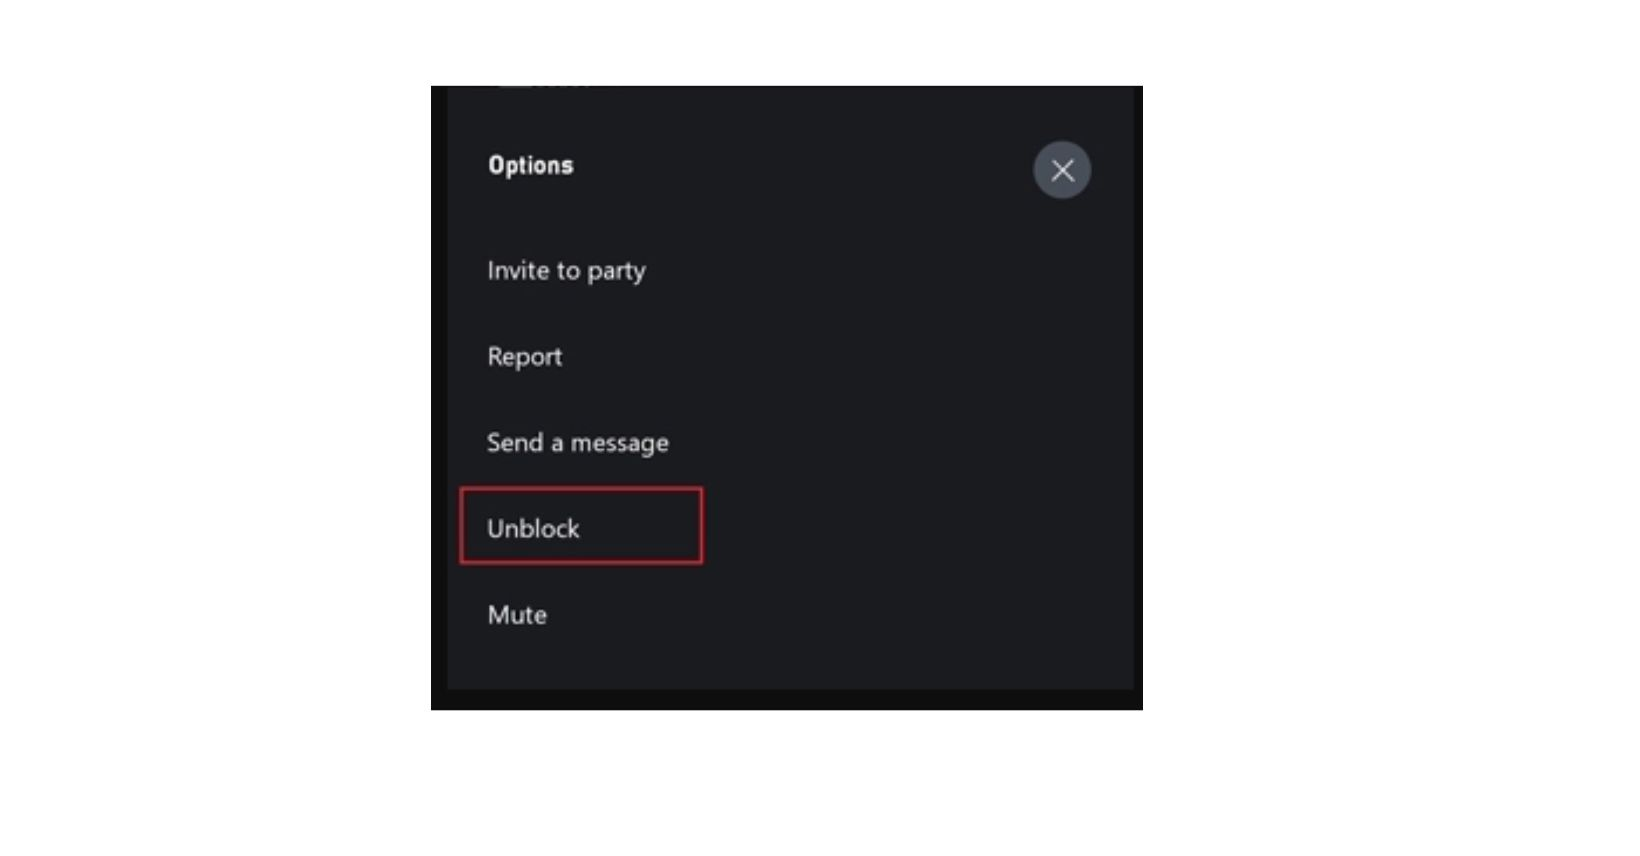 how to unblock someone on xbox, message requests, join party chat, drop down menu, unblock tab, modem router, unblock communications, select block, multiplayer game, friends list